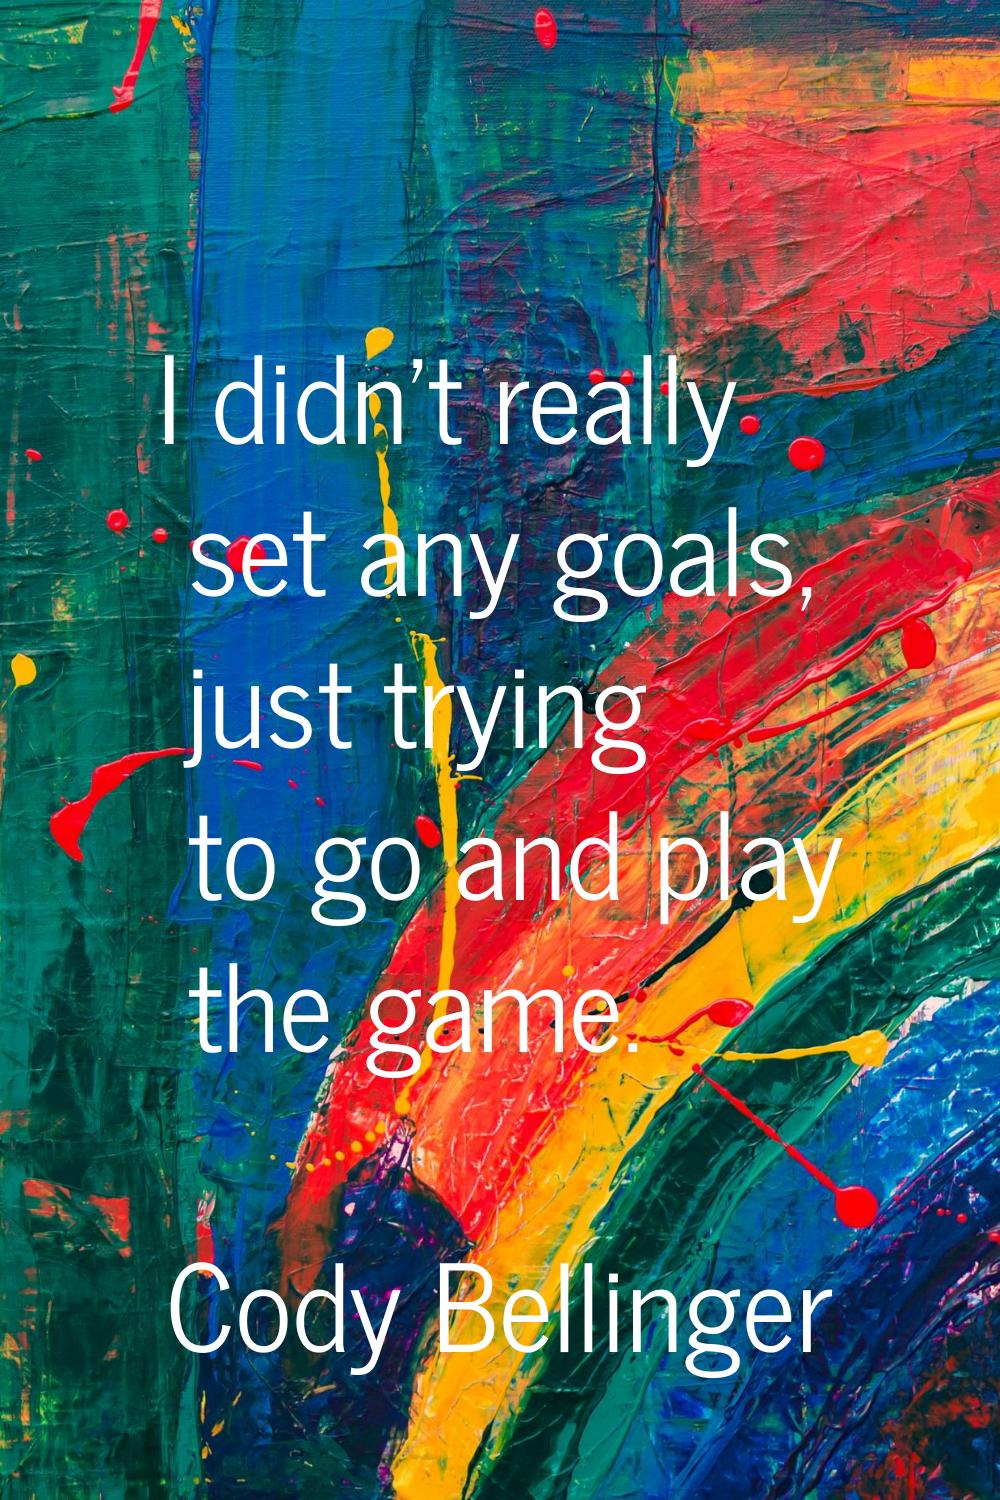 I didn't really set any goals, just trying to go and play the game.